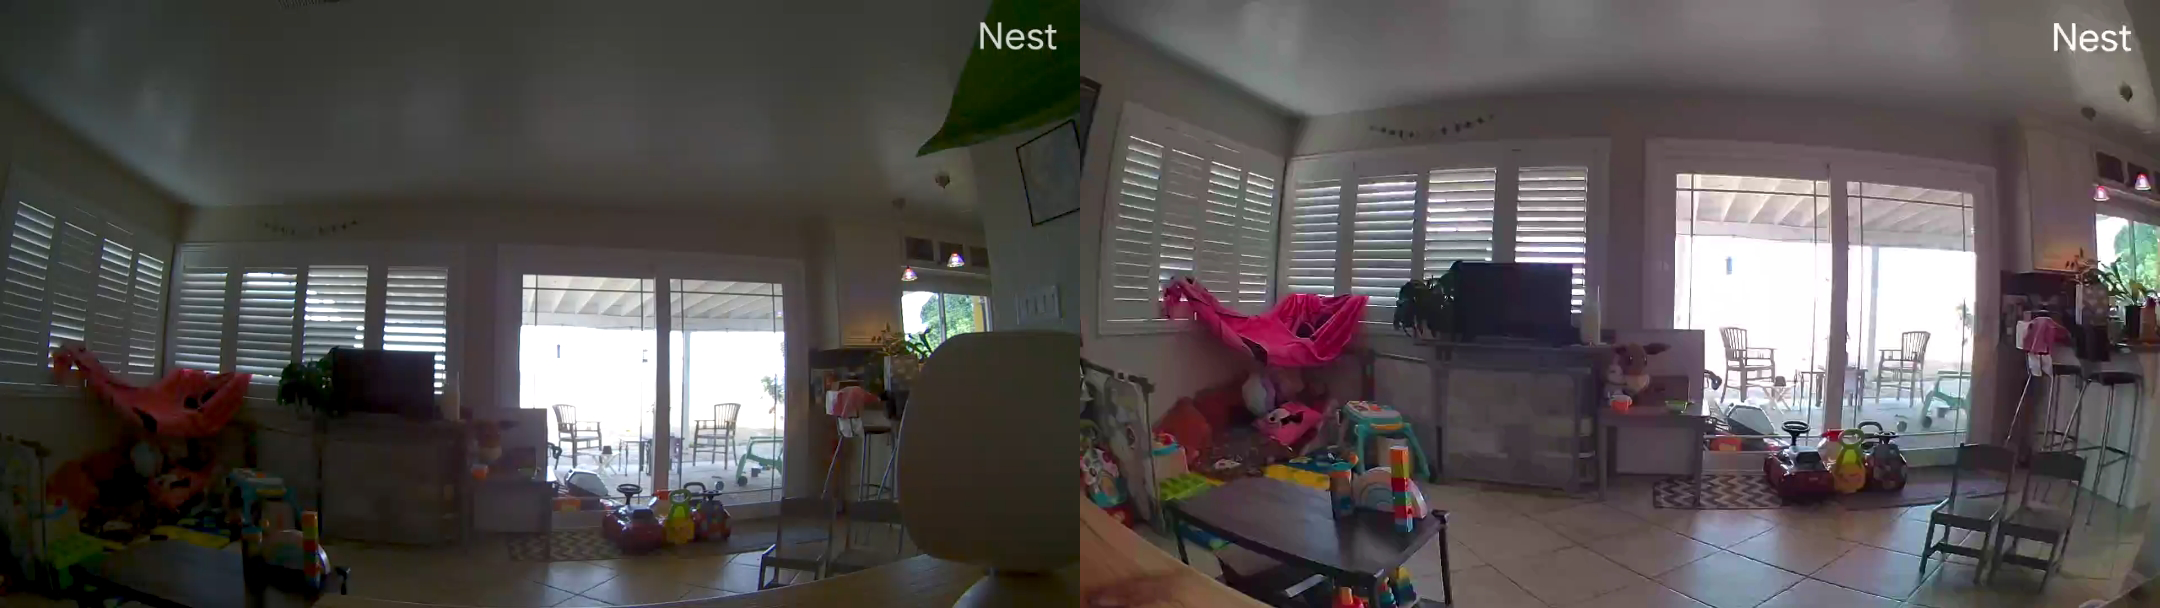 On the left is the camera preview for the original Nest camera, and on the right is the preview for the new indoor Nest Cam. (Image: Florence Ion / Gizmodo)